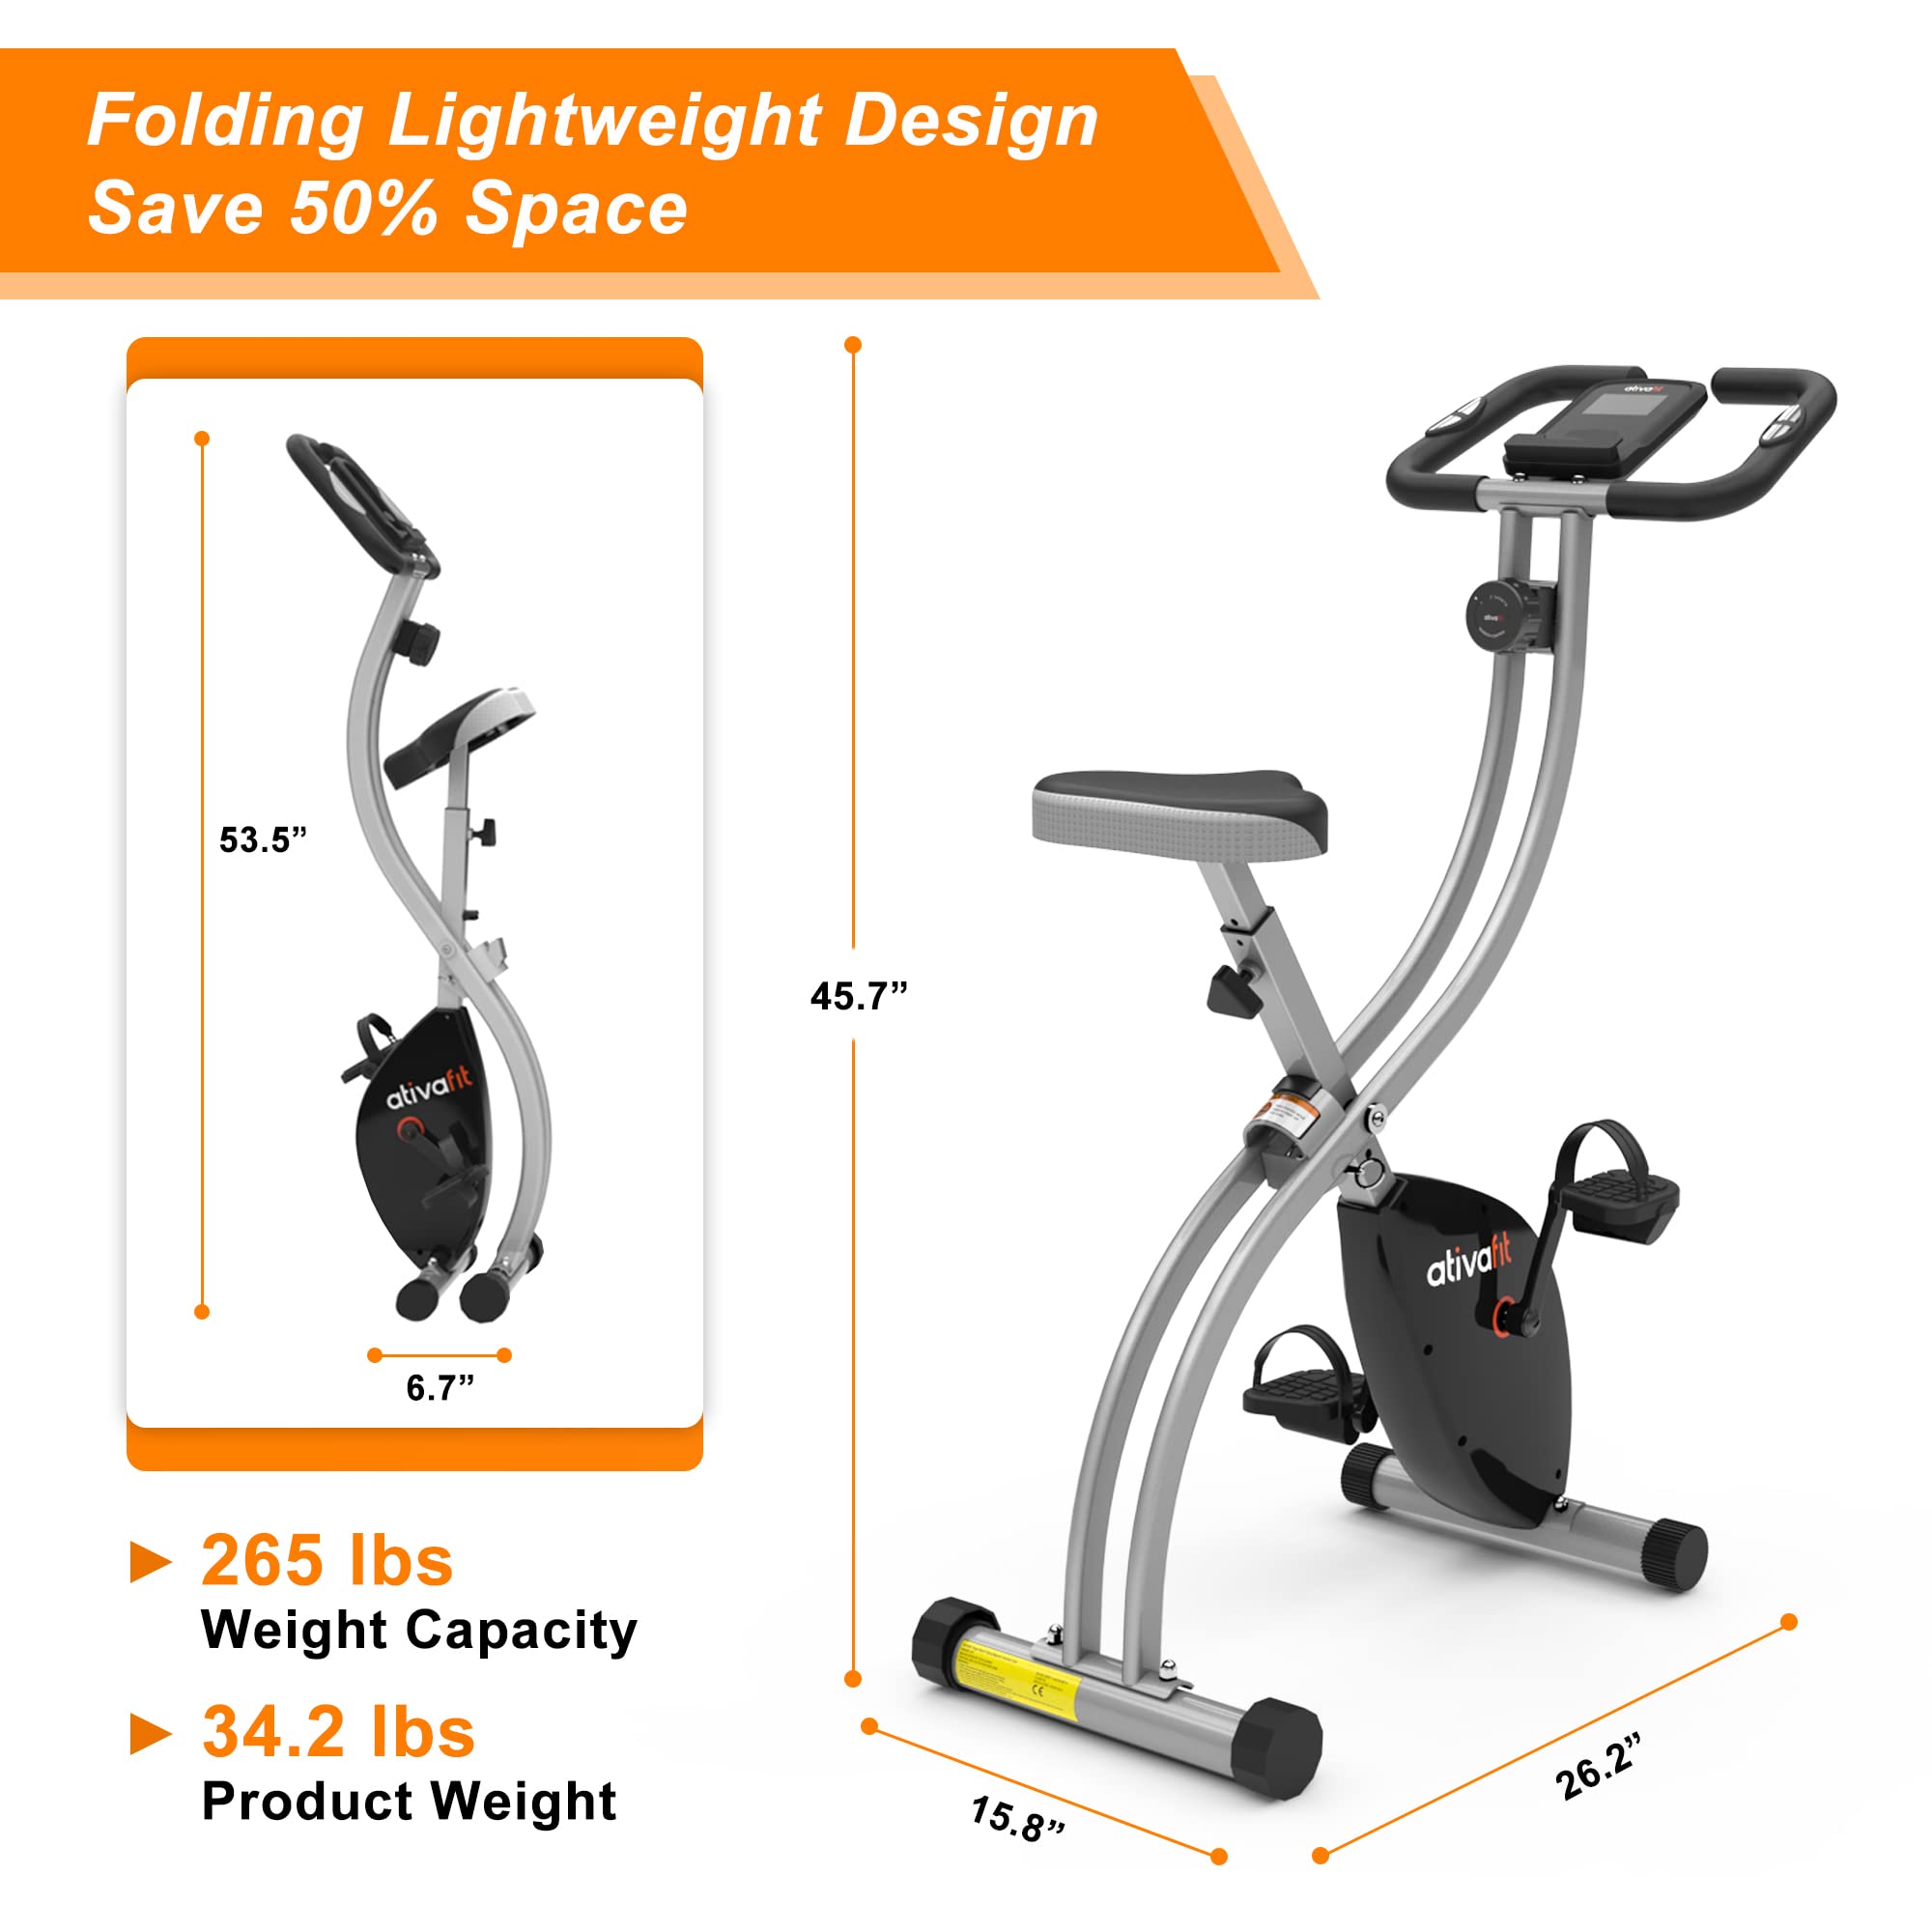 ATIVAFIT Folding Exercise Bike, Magnetic Foldable Stationary Bike, Indoor Cycling Exercise Bike for Home Workout